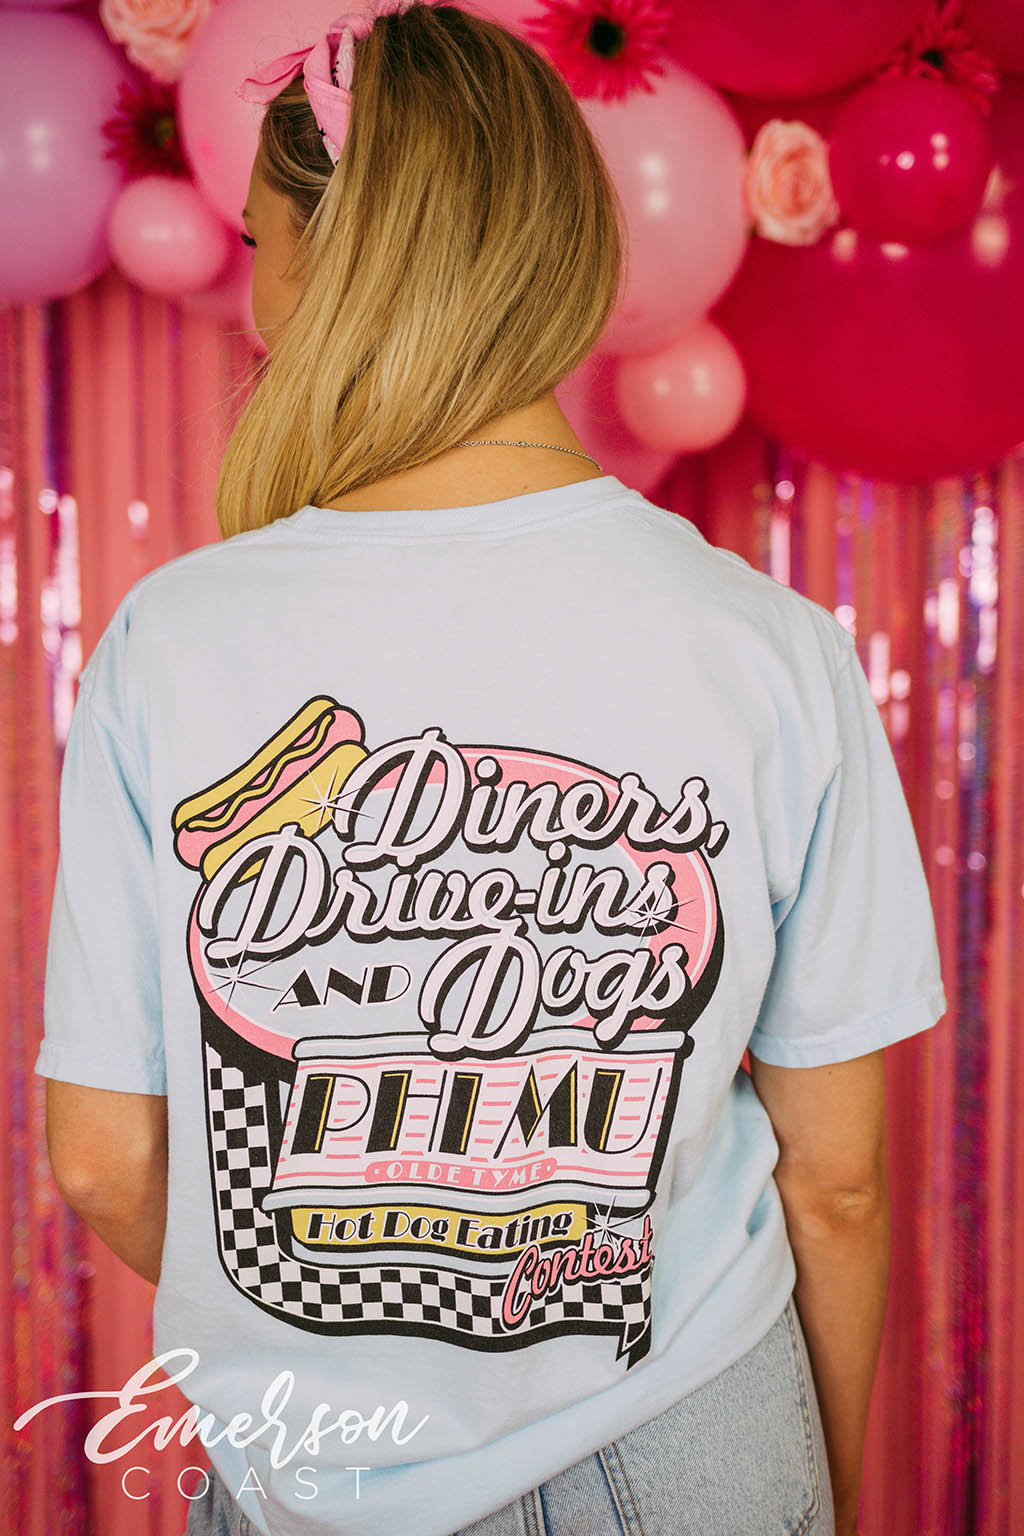 Phi Mu Diners, Drive-ins and Dogs Hot Dog Eating Contest Tee